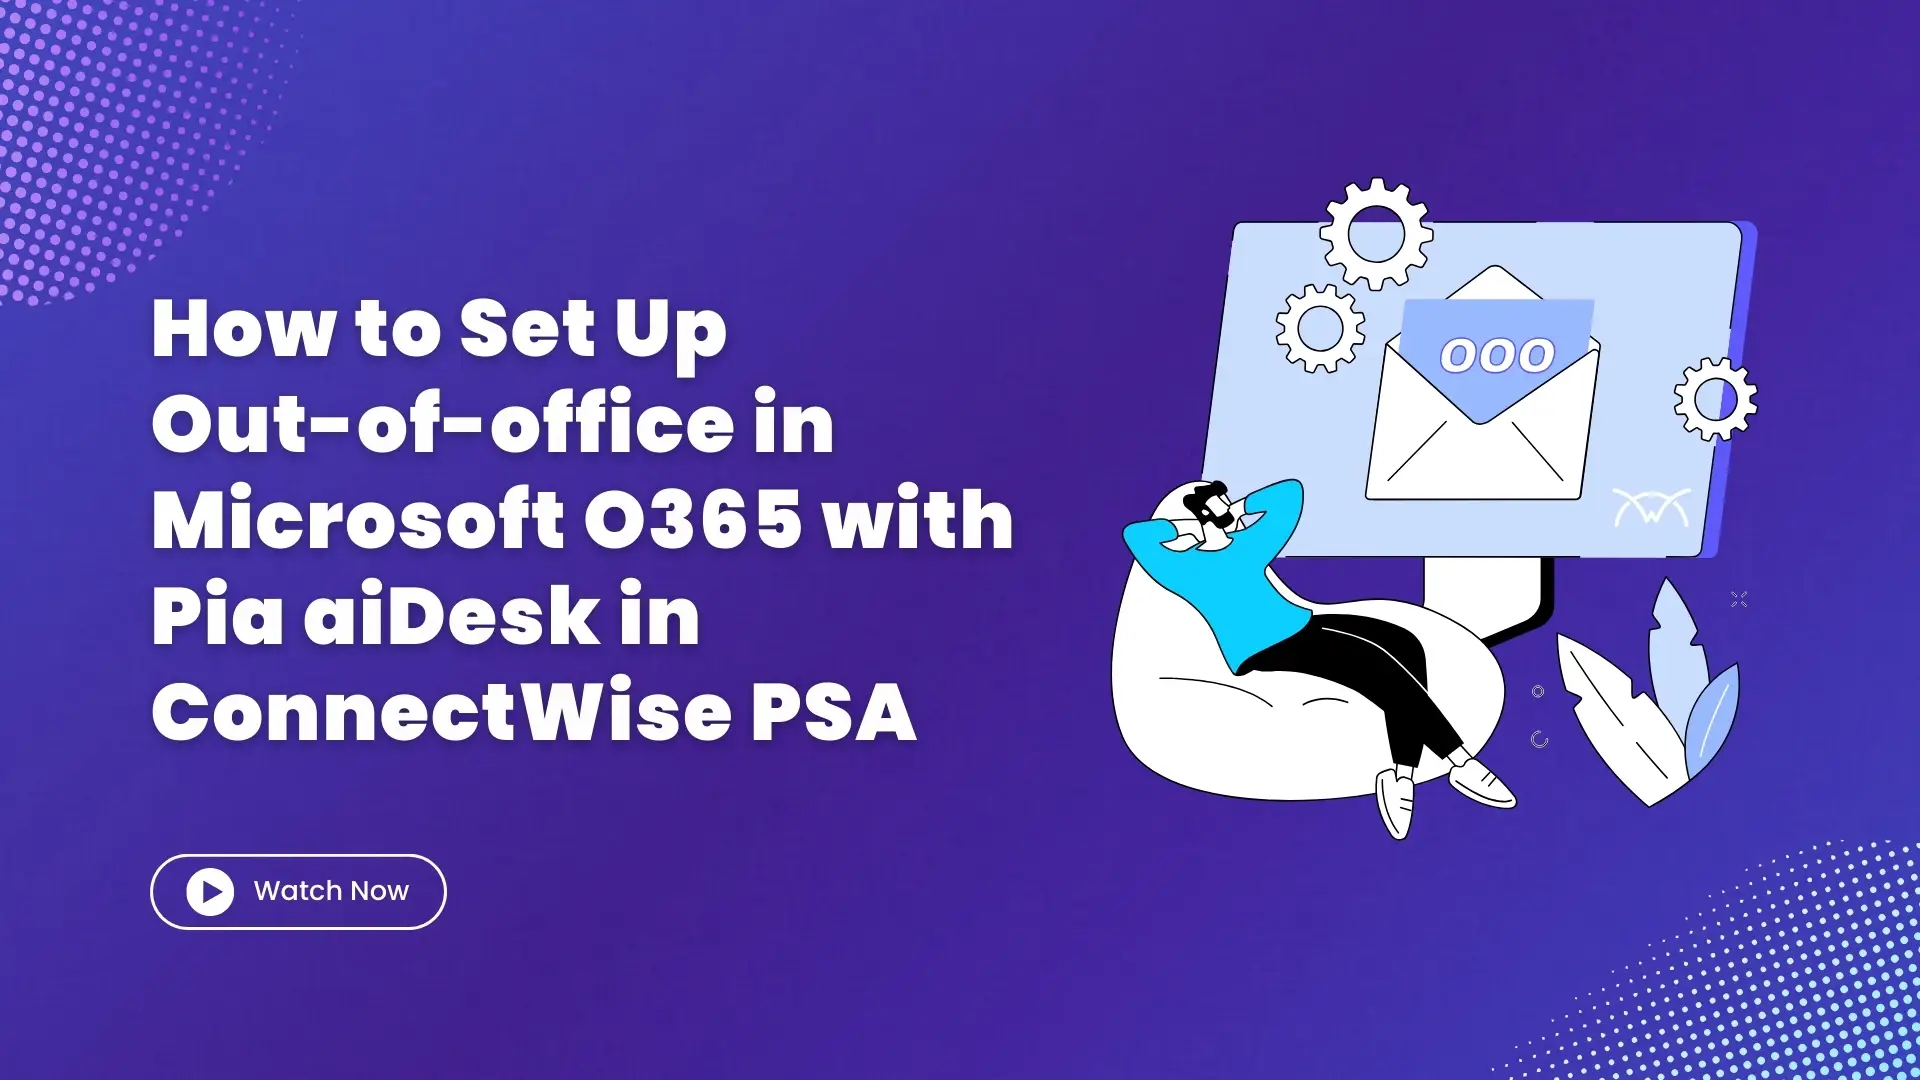 How to Set Up Out-of-office in MS O365 with Pia aiDesk in ConnectWise PSA